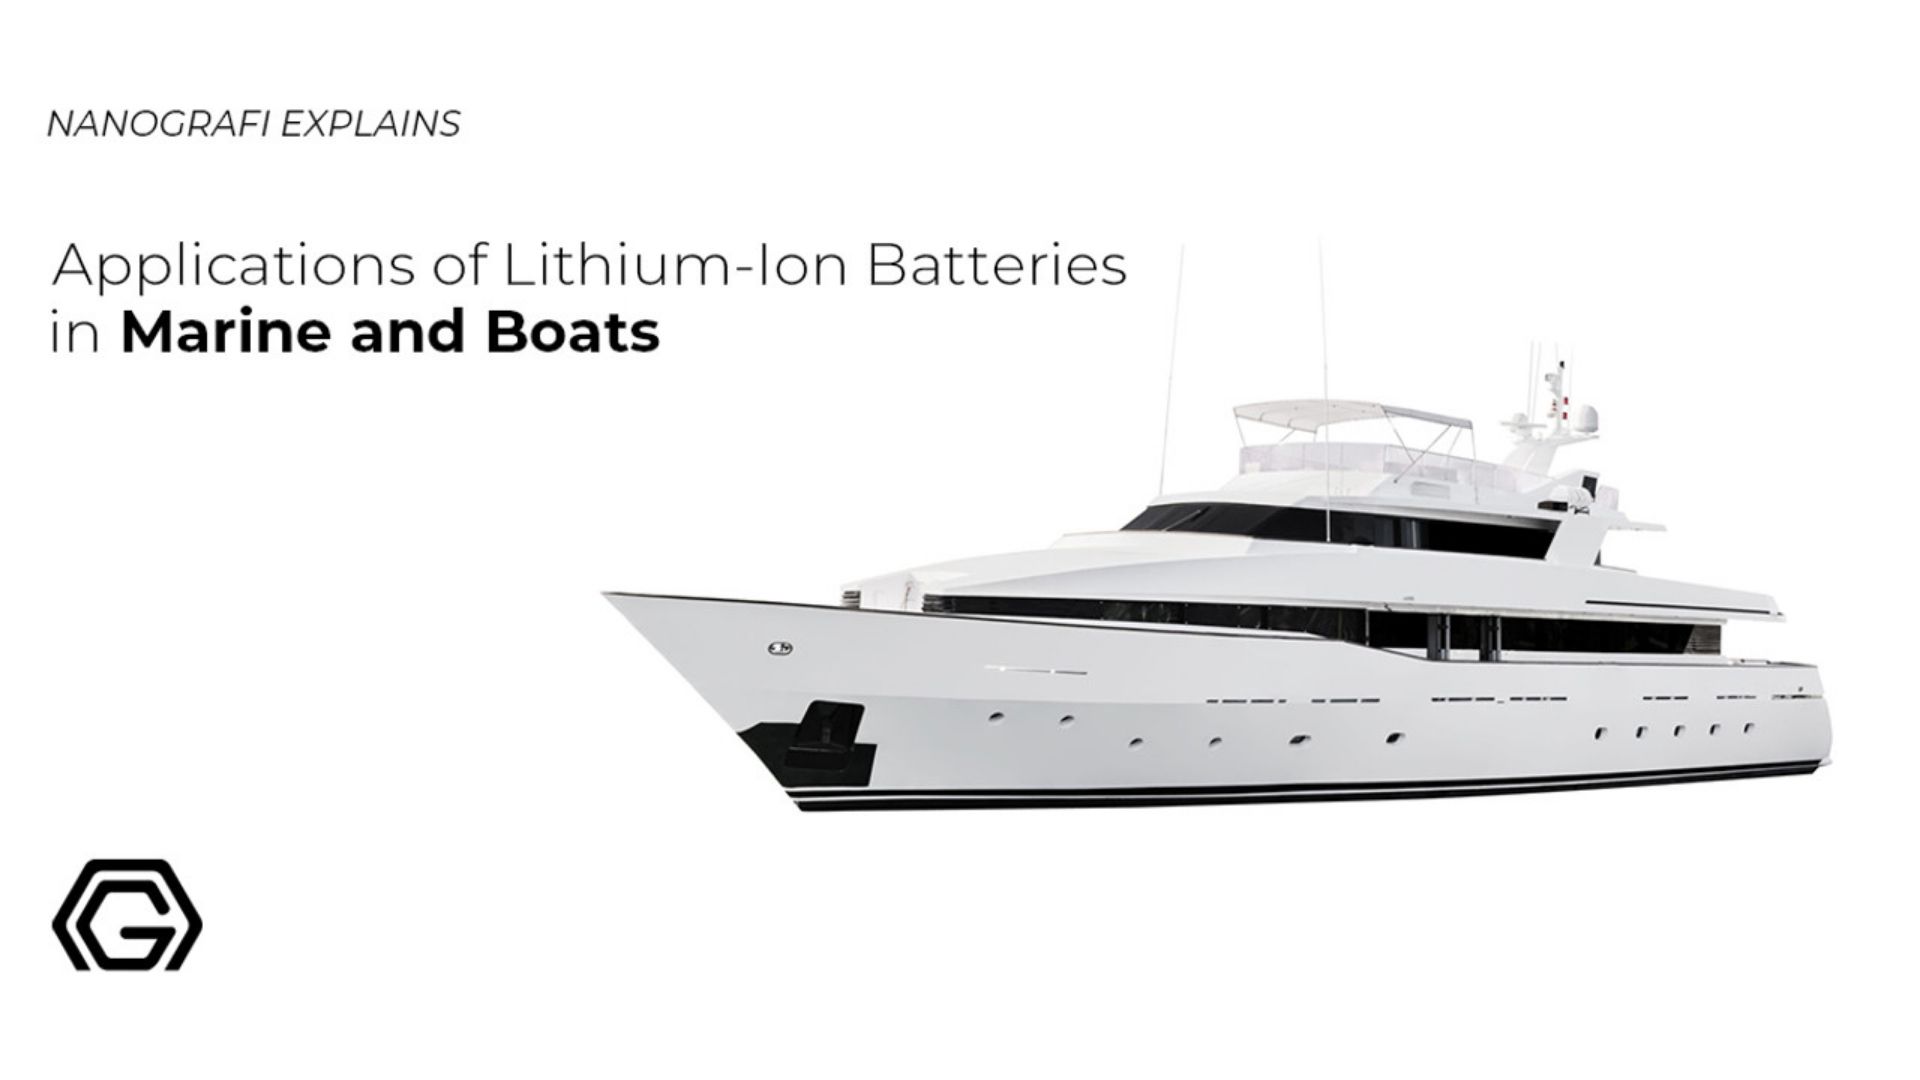 Applications of lithium-ion batteries in marine and boats